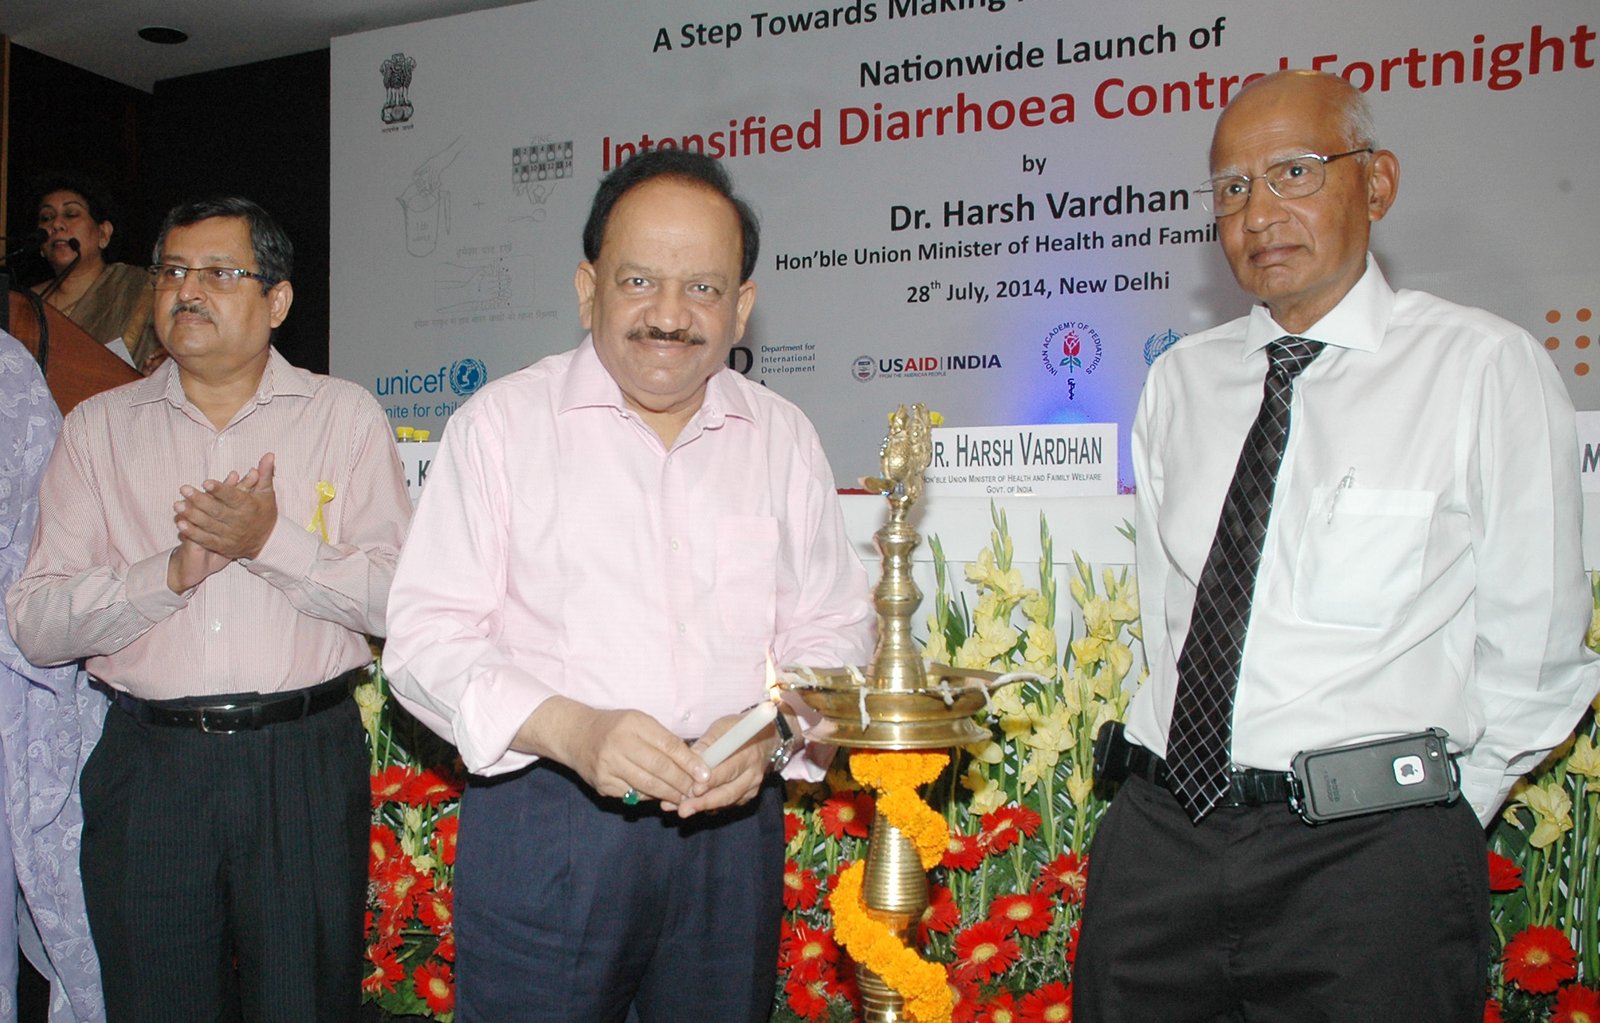 The Union Minister for Health and Family Welfare, Dr. Harsh Vardhan lighting the lamp at the launch of the Nationwide â€œIntensified Diarrhea Control Fortnight (IDCF)â€?, in New Delhi on July 28, 2014.